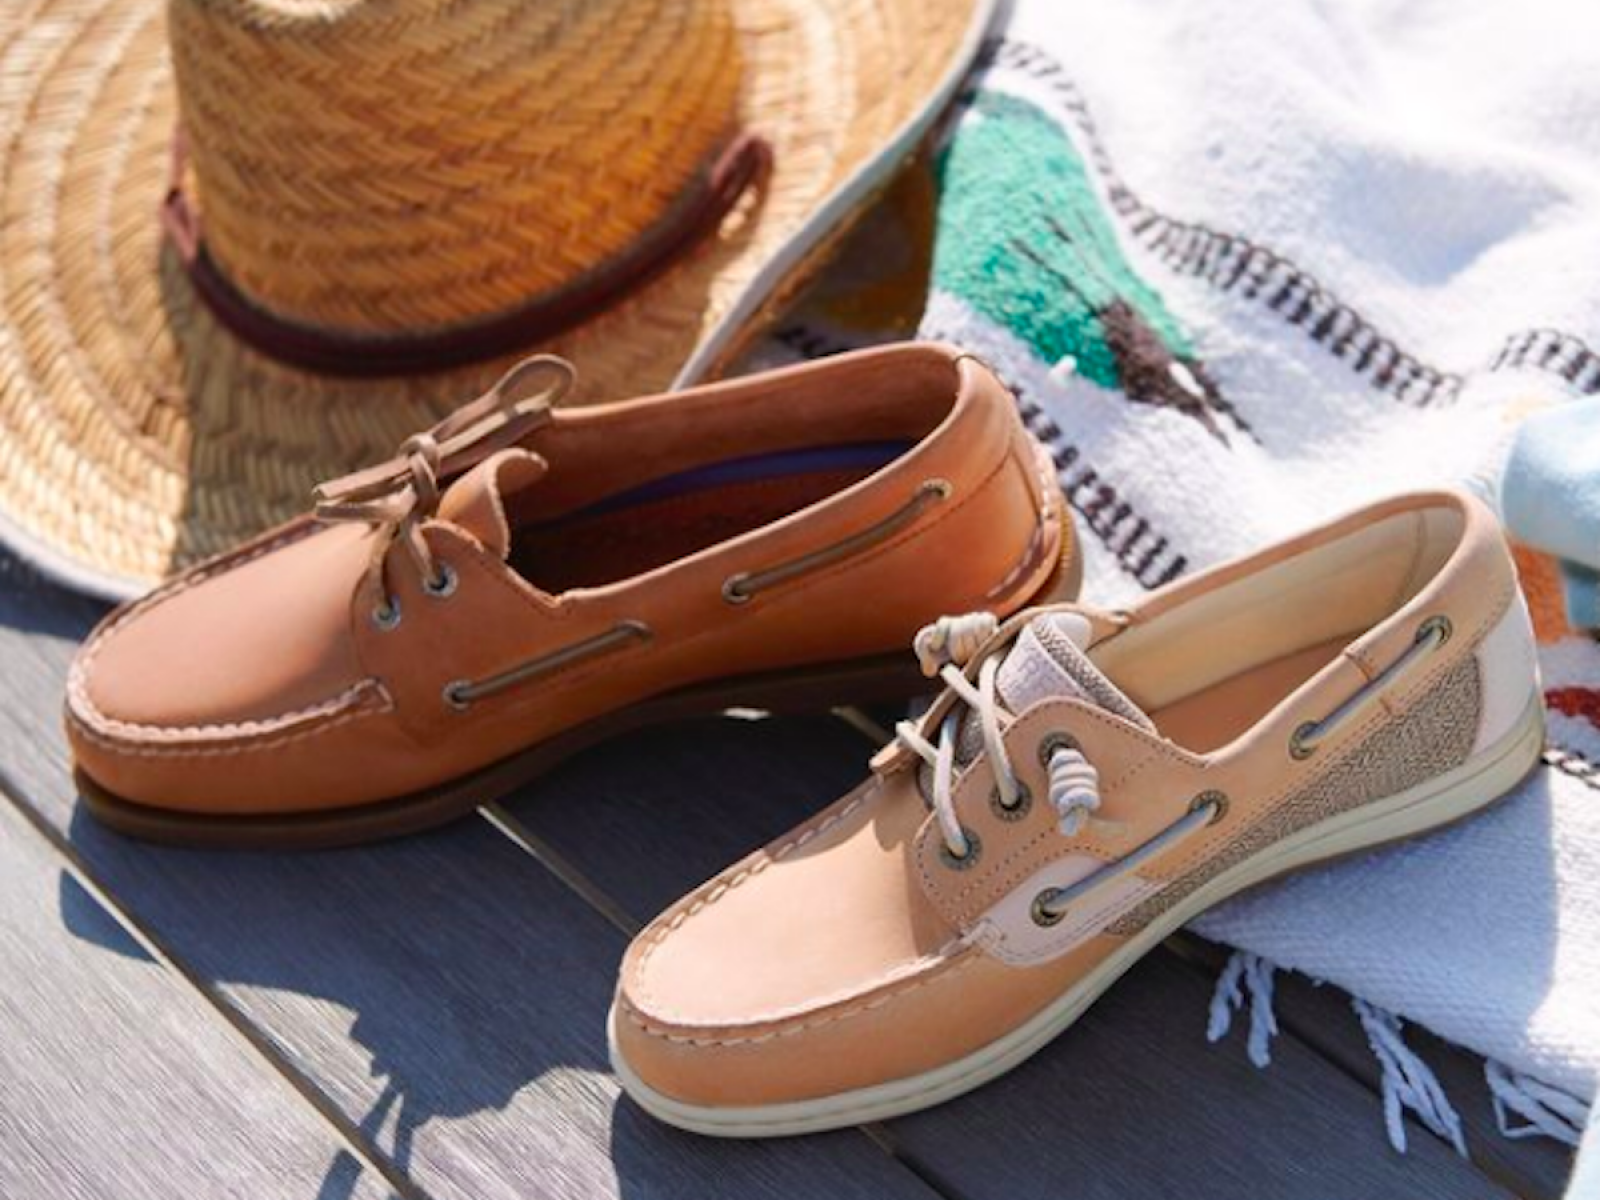 Here's How to Wear Boat Shoes the Right Way